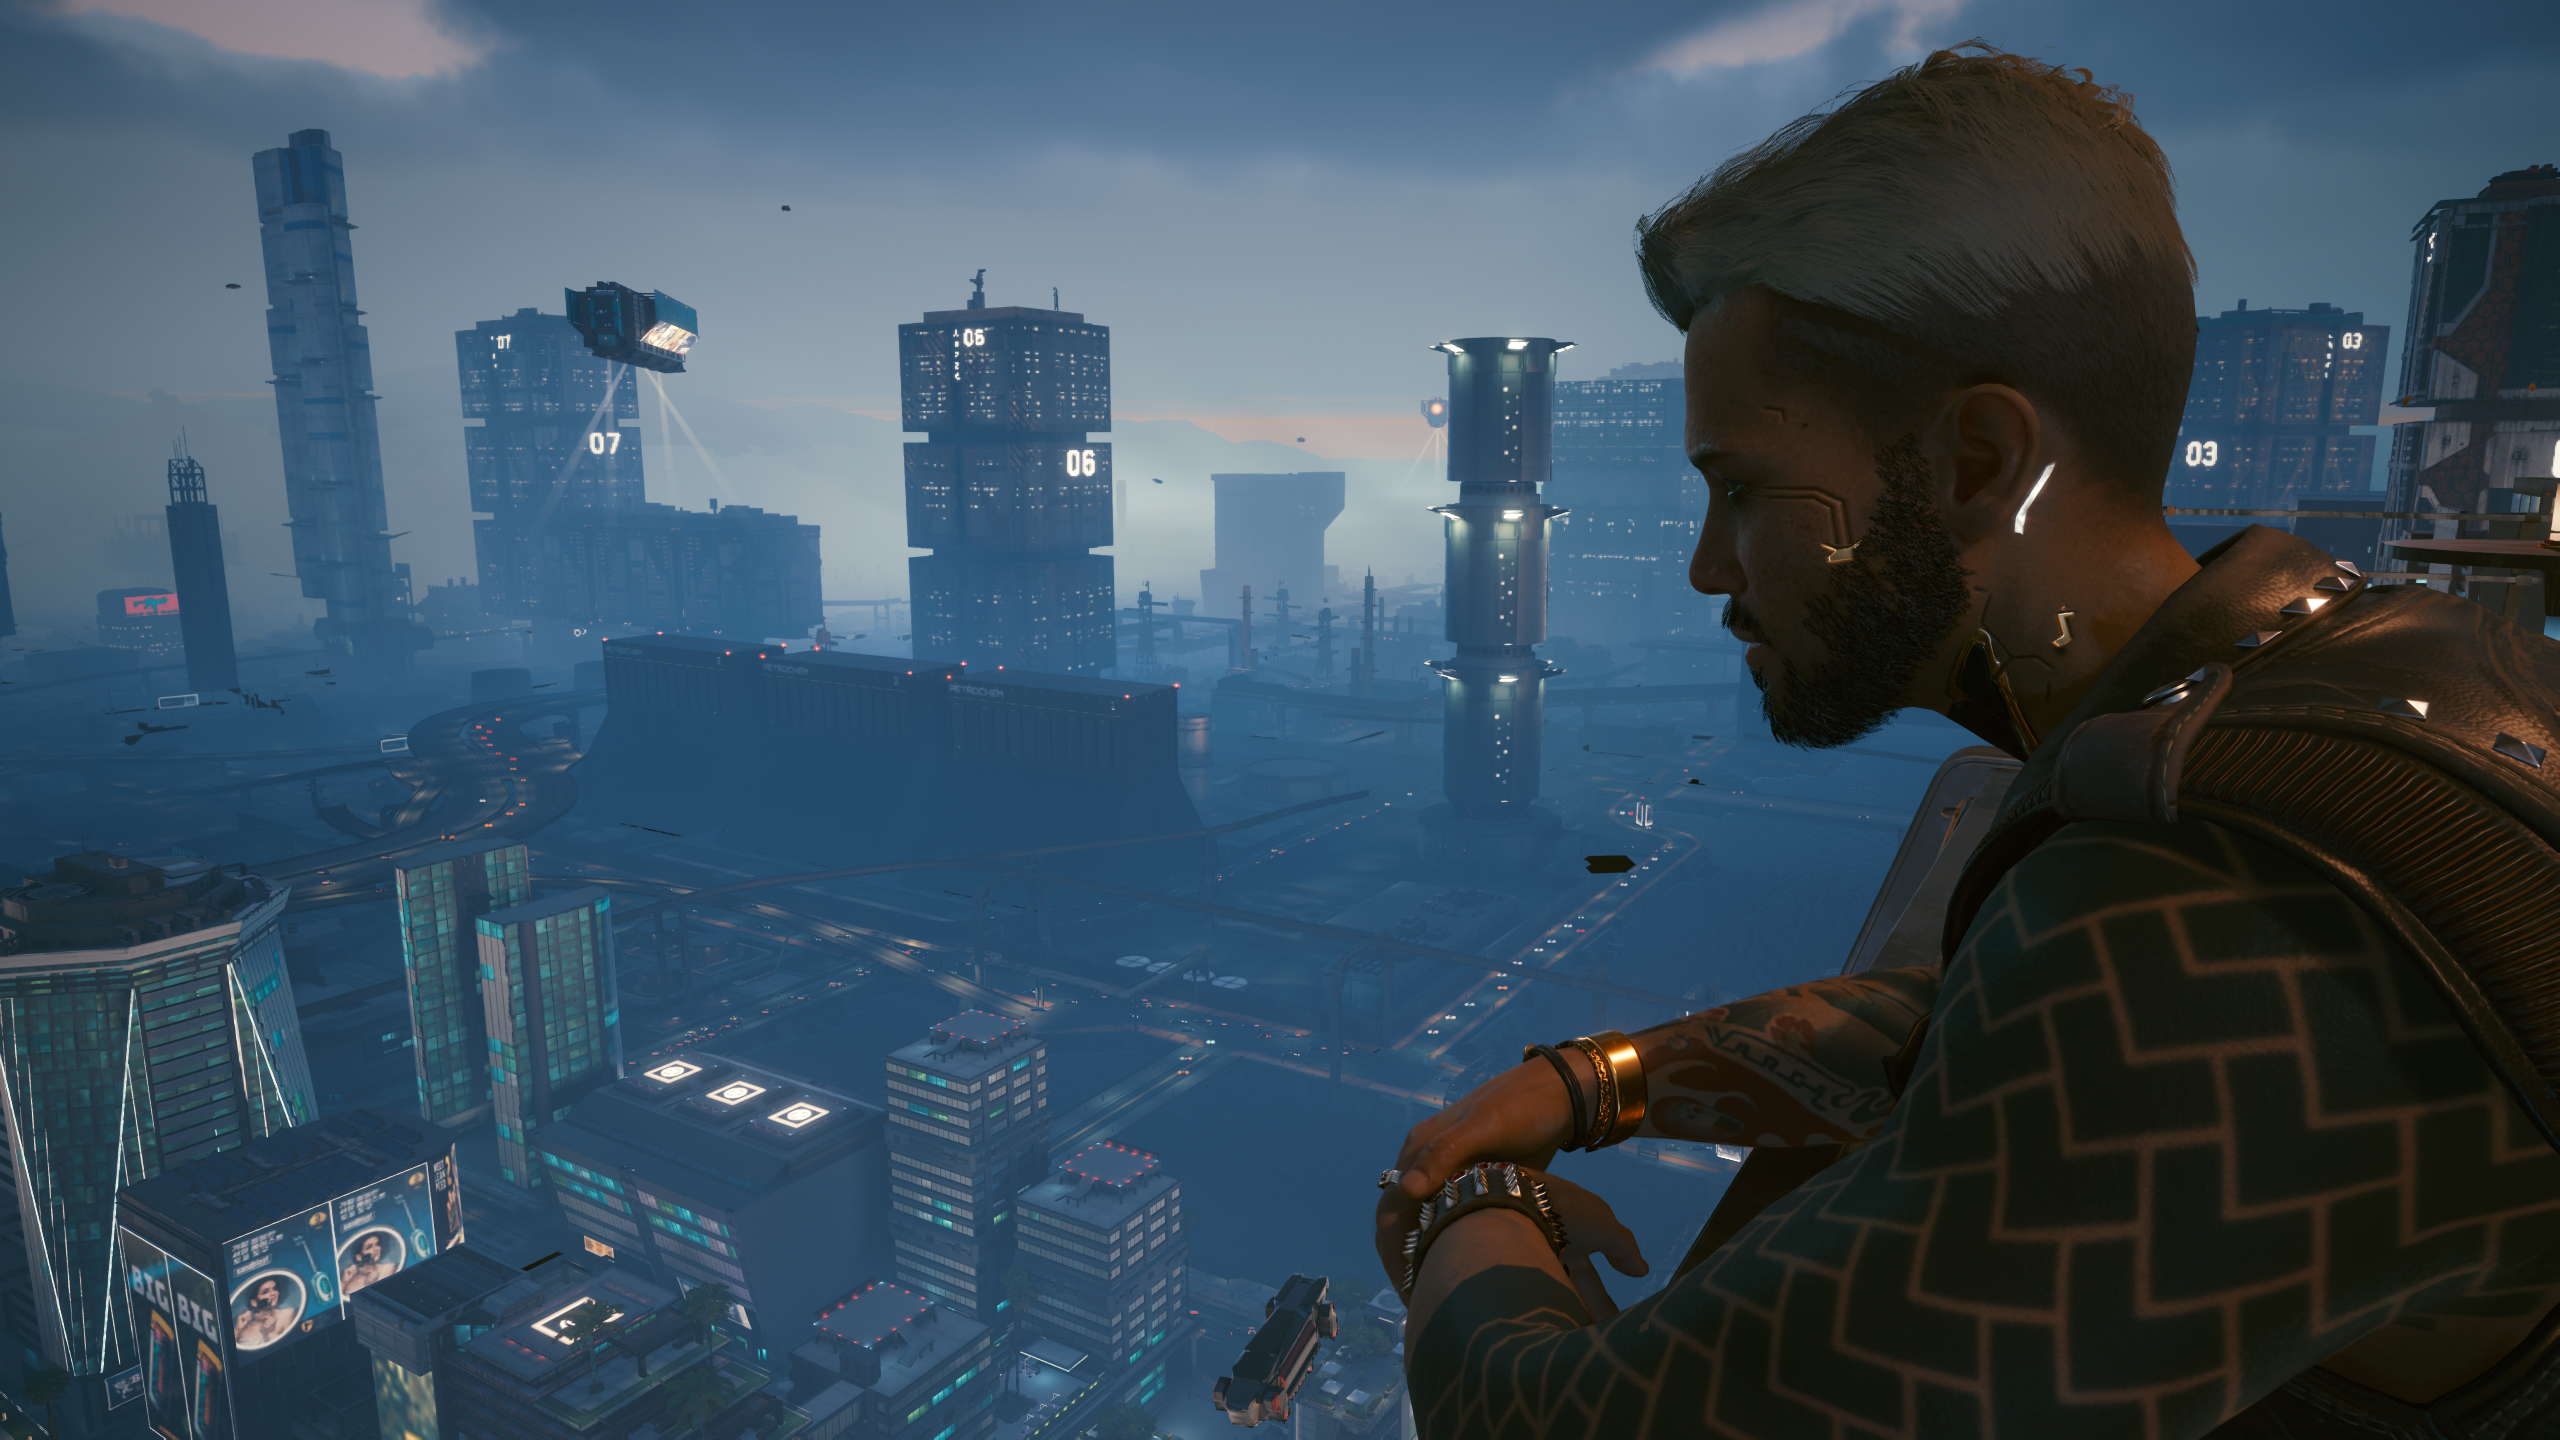 Cyberpunk character looking over city